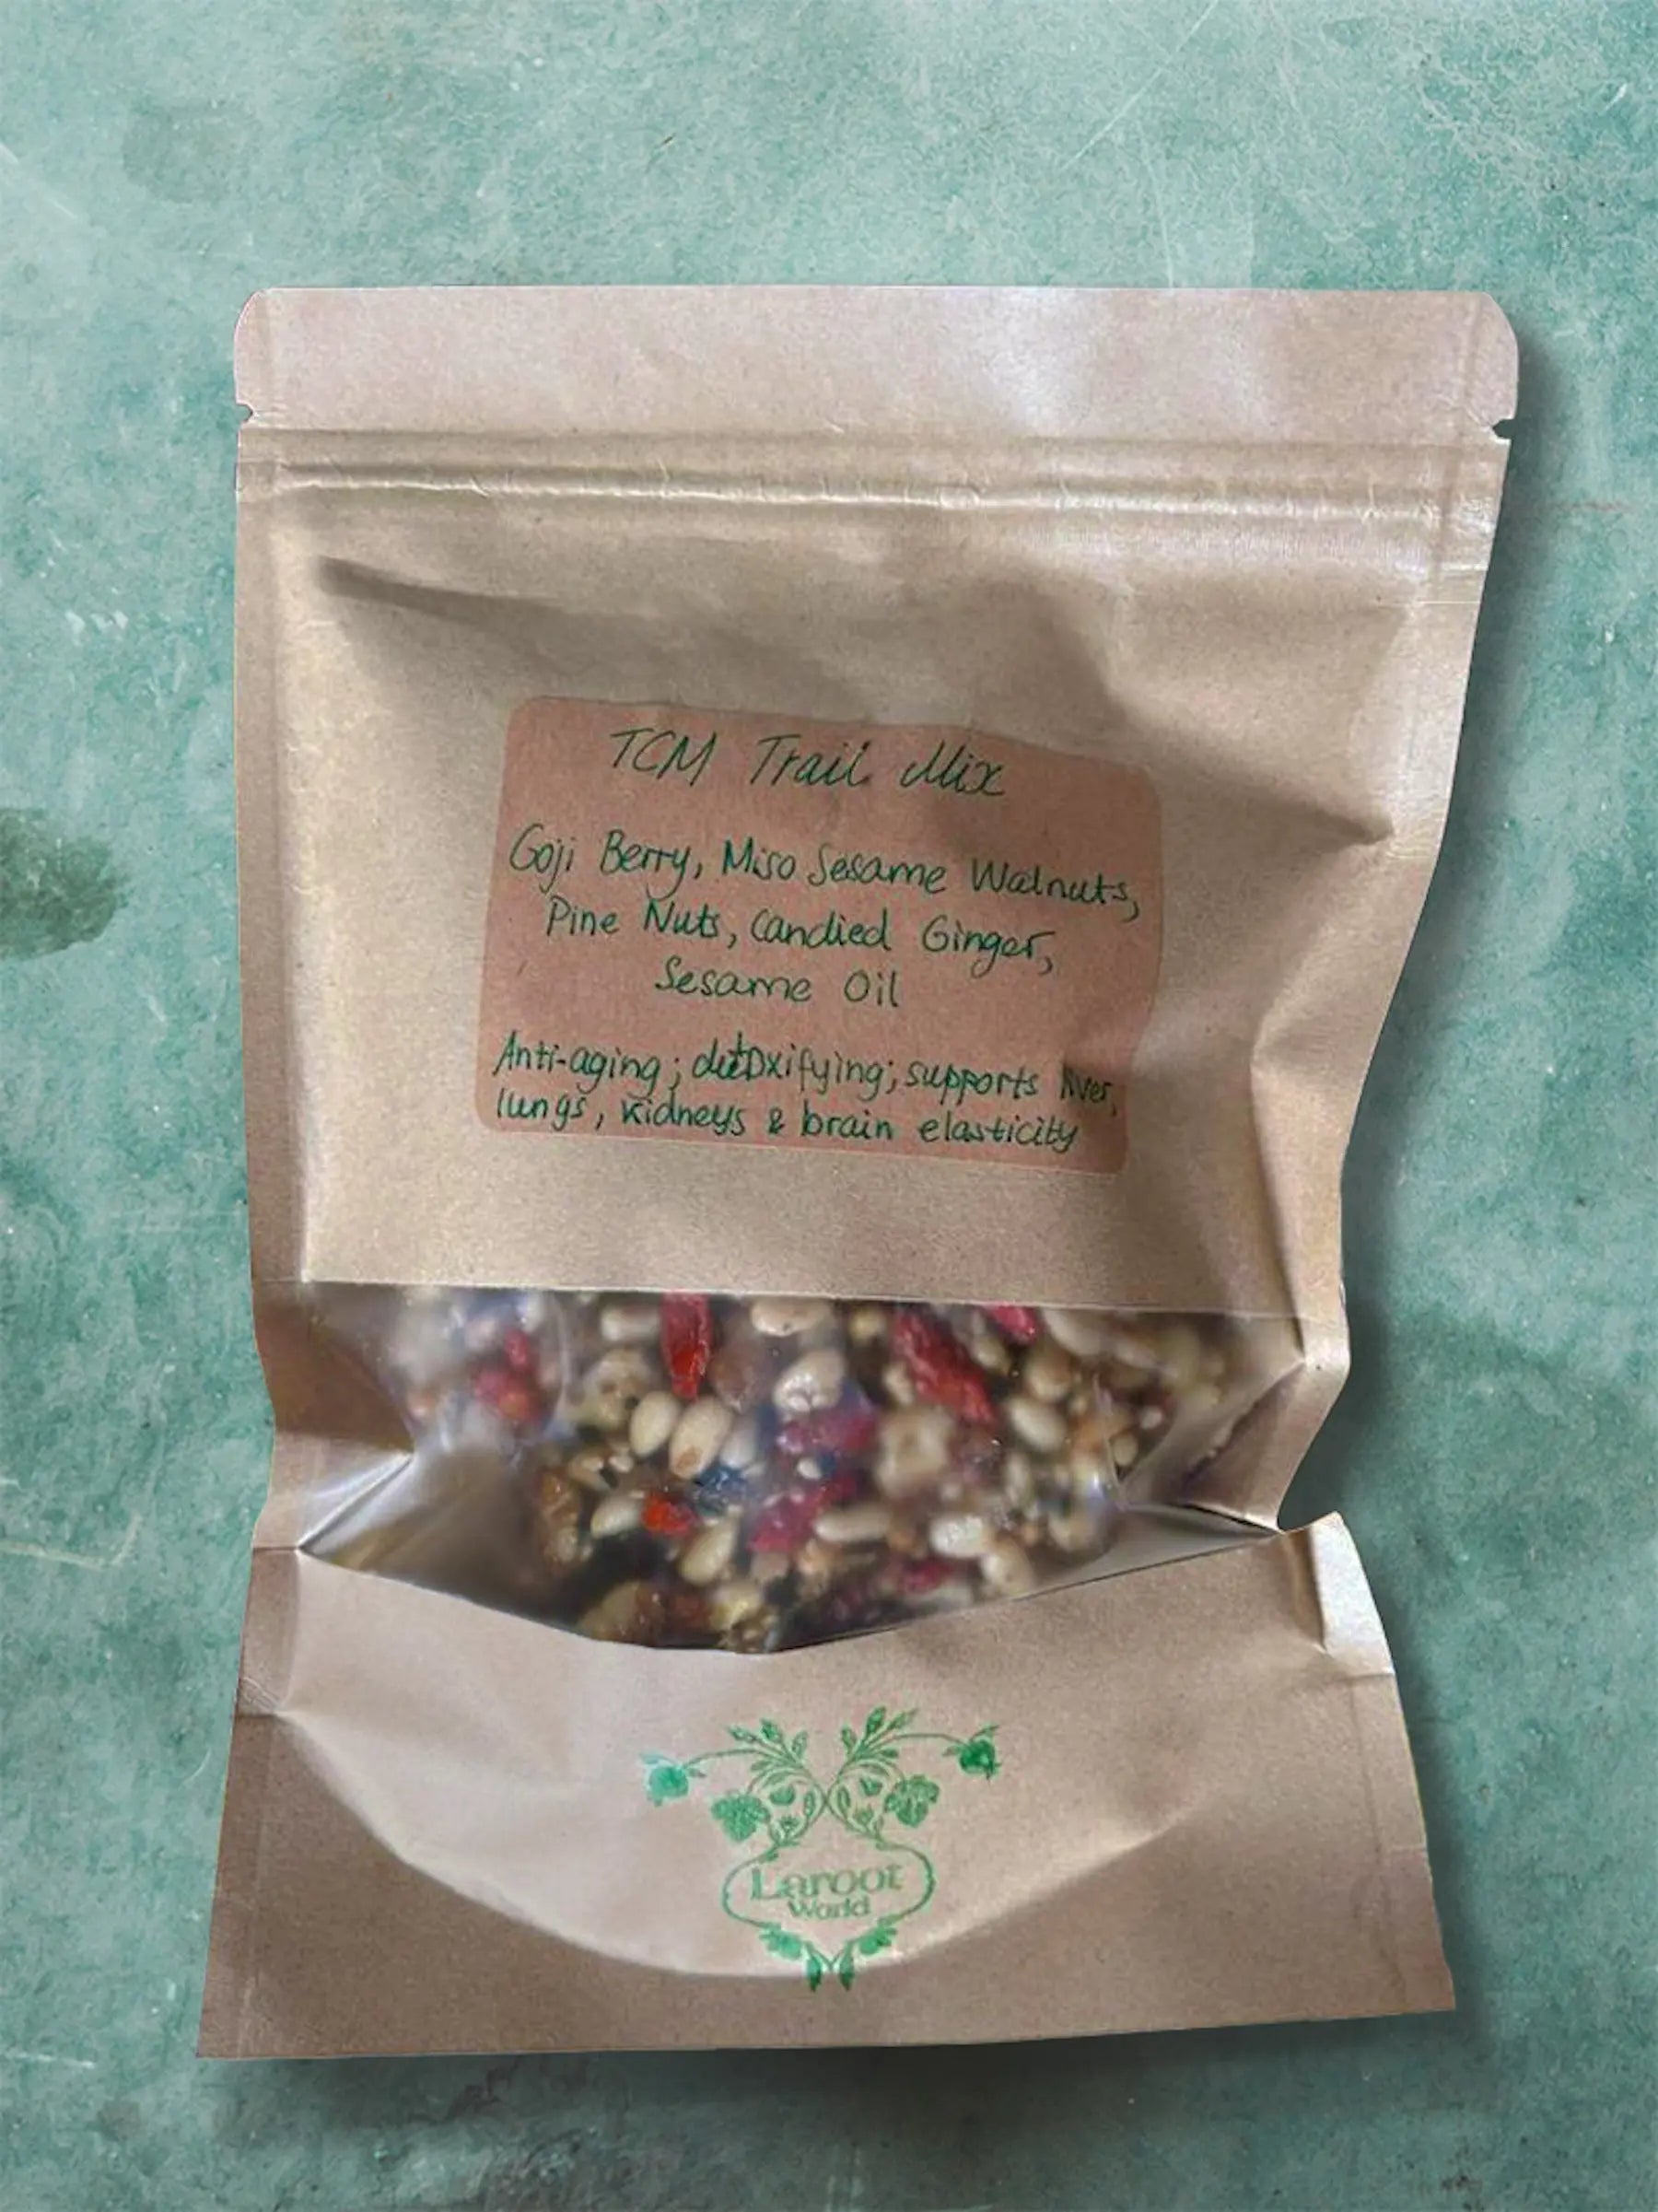 TCM Trail Mix provided by Laroot World, an organic, local, gluten free New York City flexitarian, pescatarian, carnitarian, vegan, and vegetarian meal delivery service 